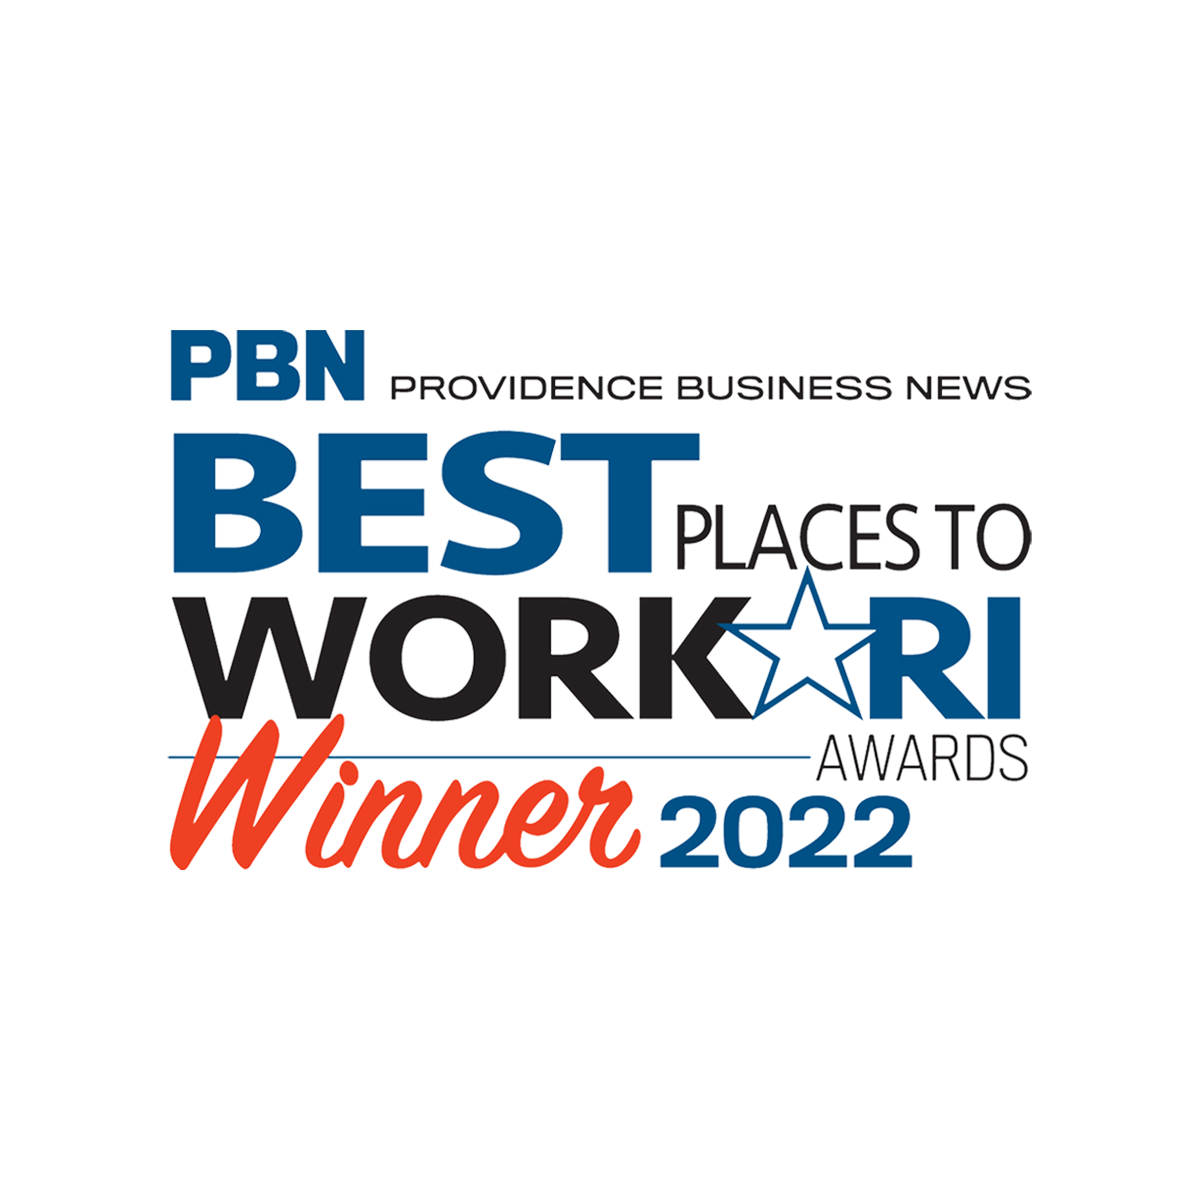 PBN Best Places to Work 2022